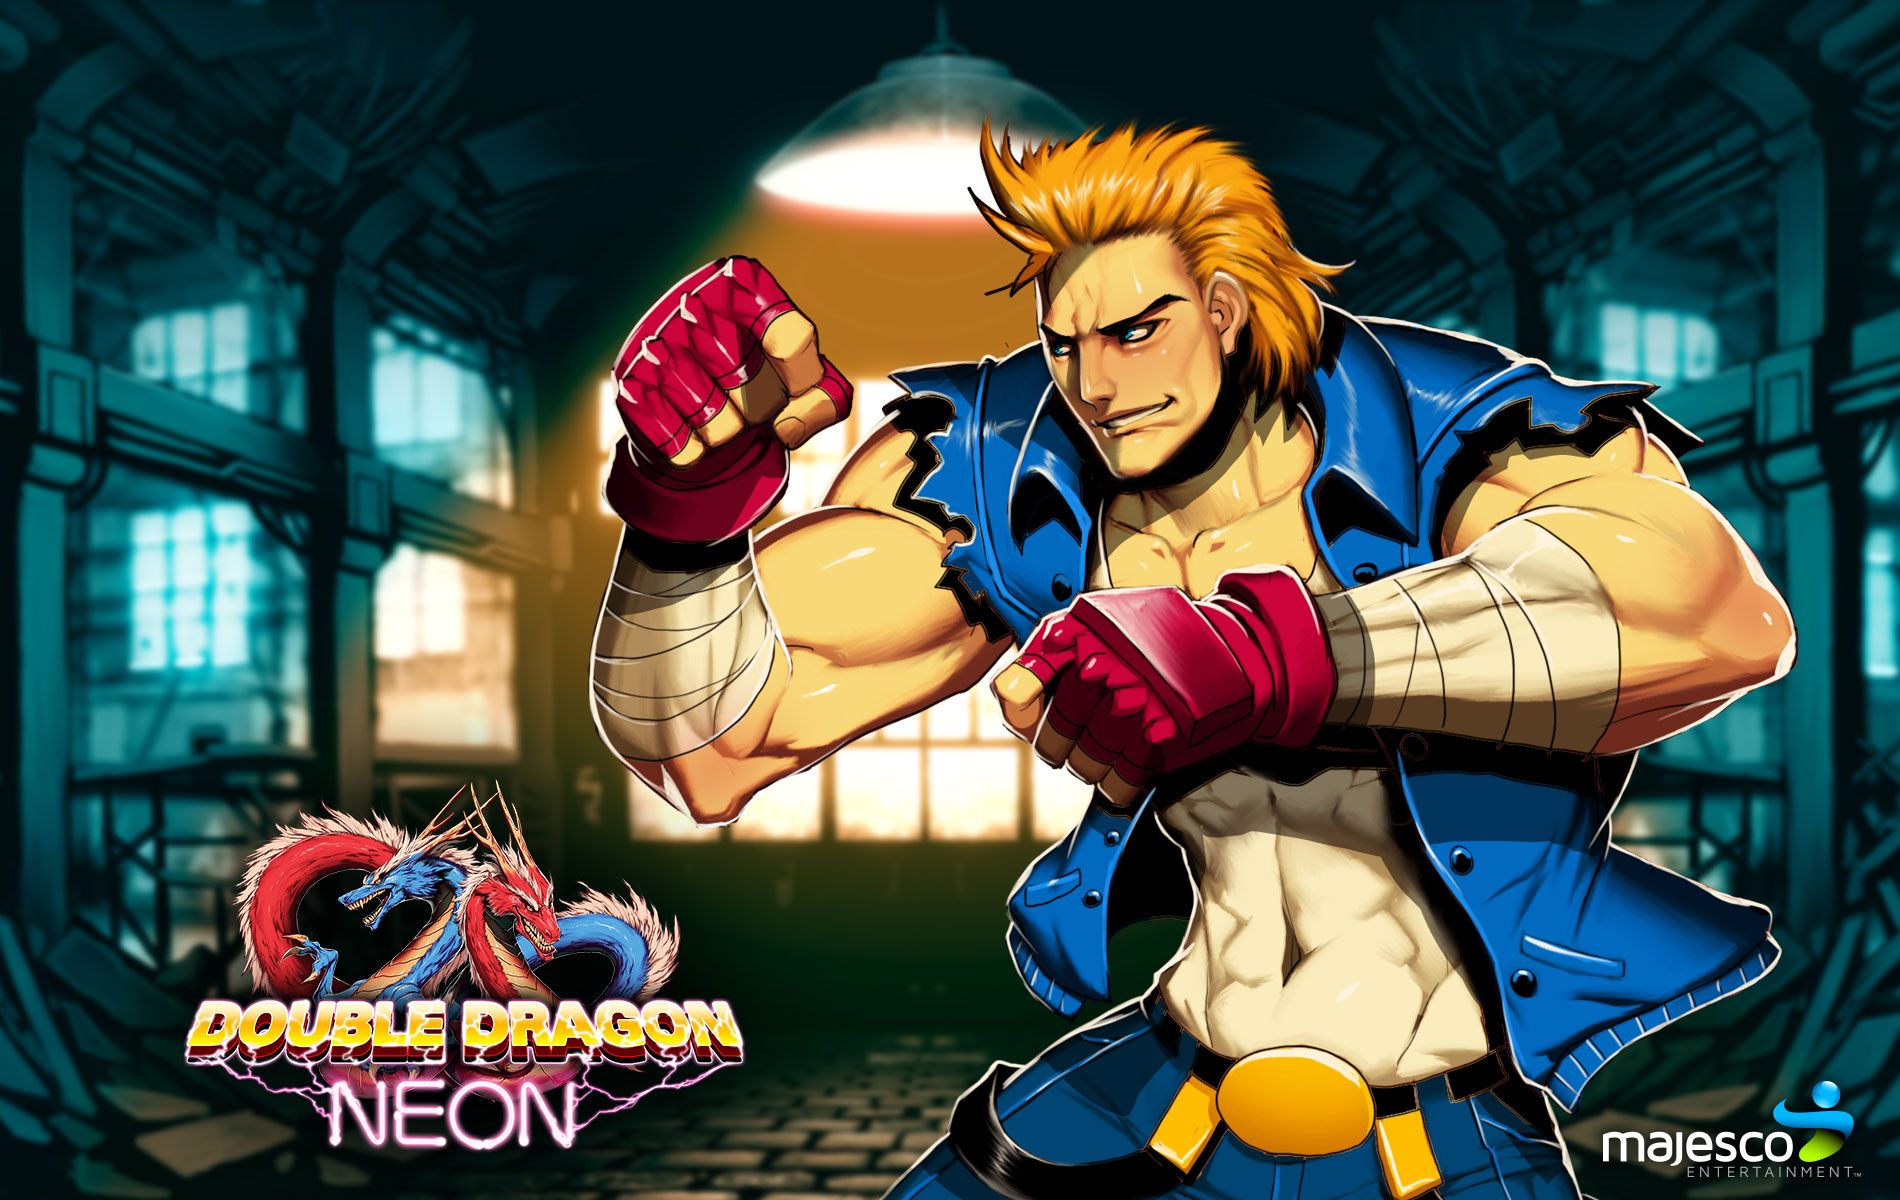 Double Dragon: Neon embraces the cheese and looks good doing it